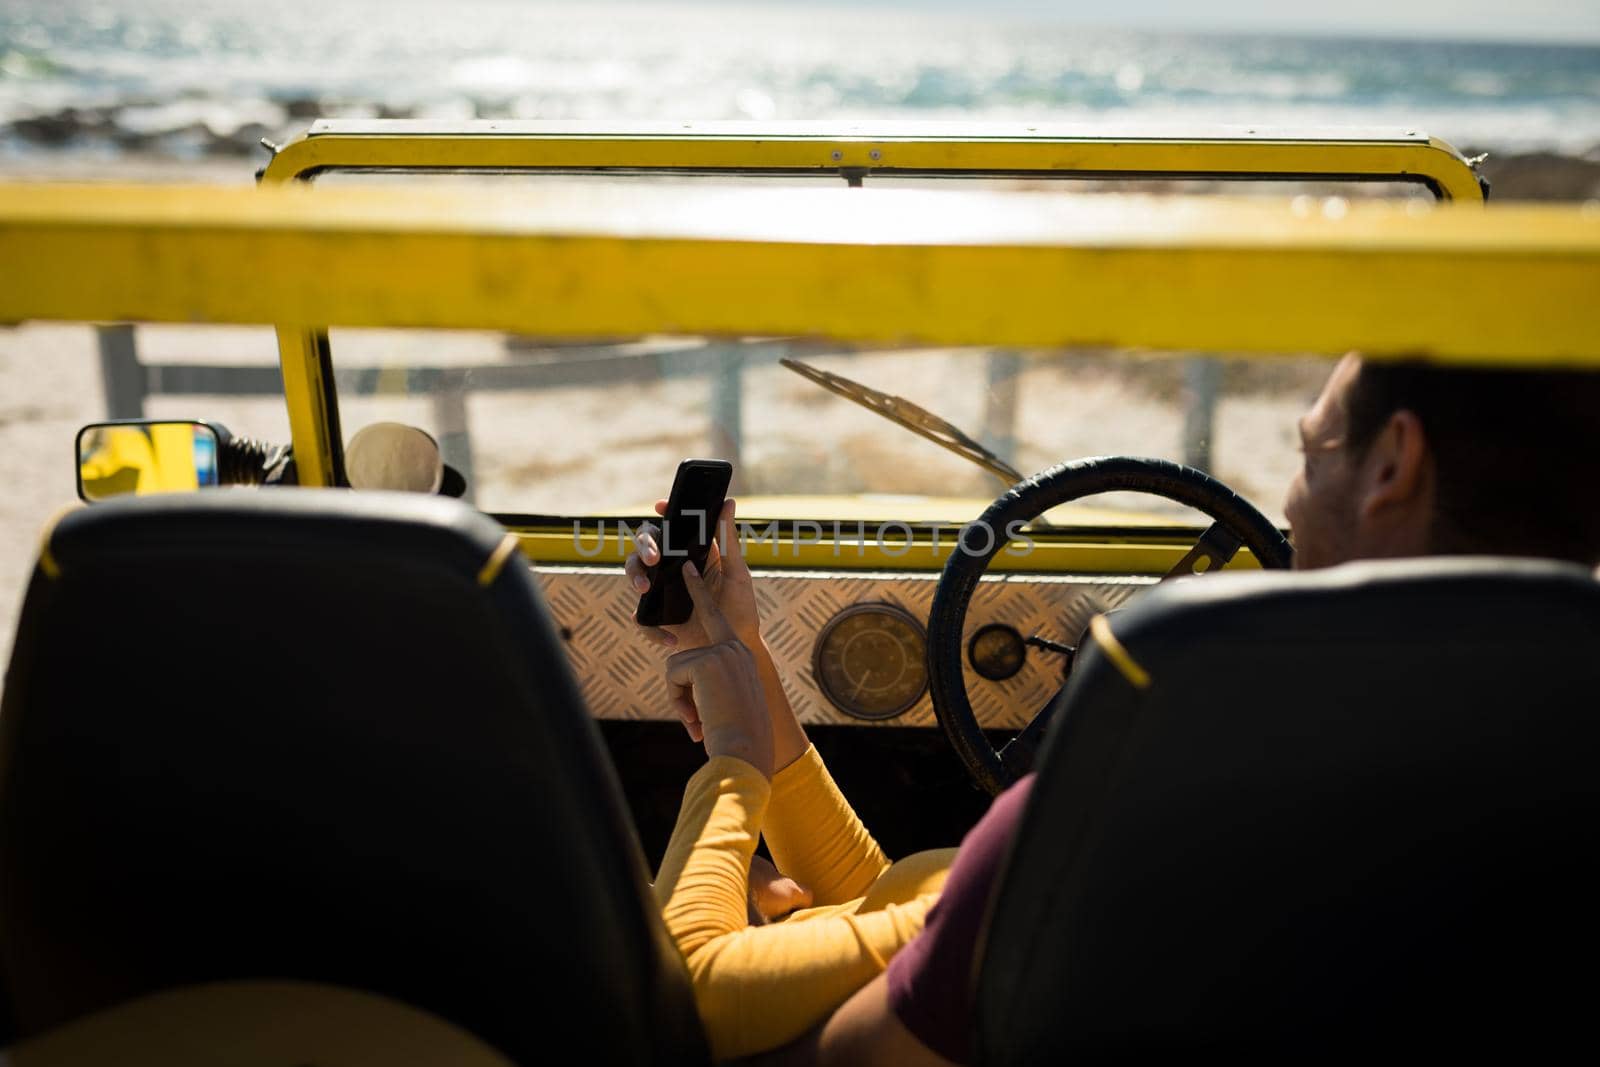 Caucasian couple lying on a beach buggy by the sea using smartphone. beach break on summer holiday road trip.